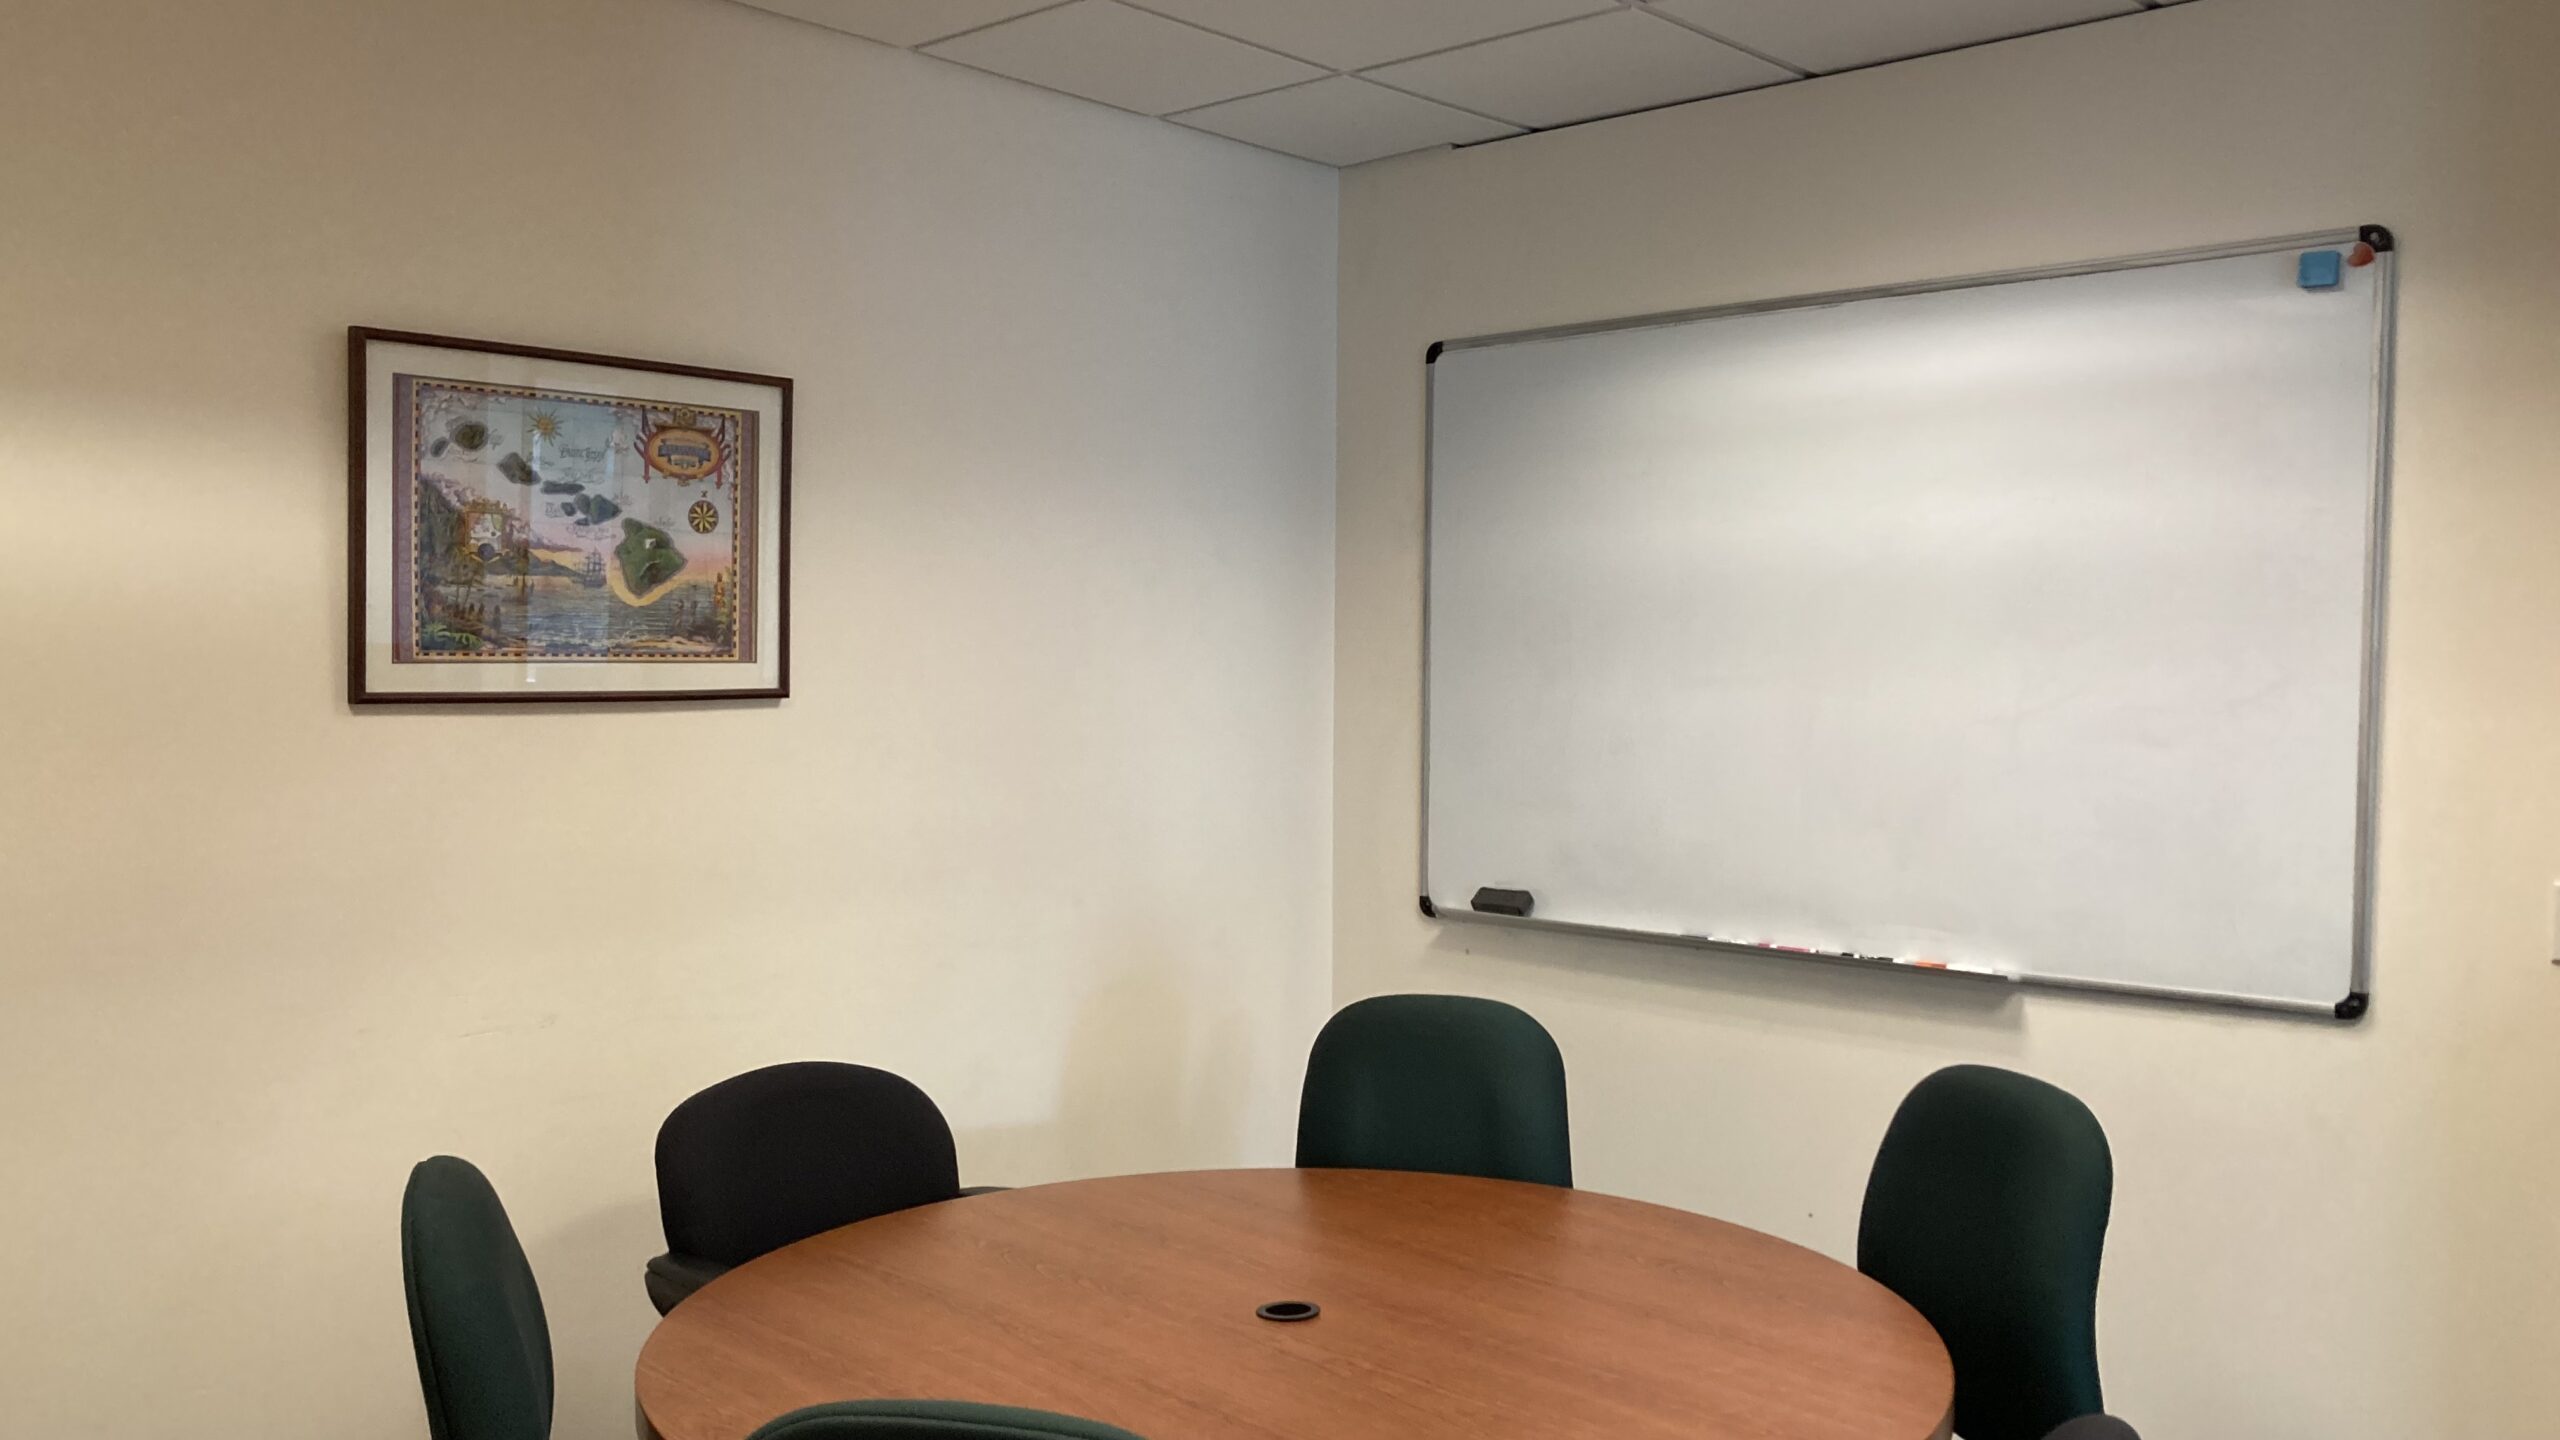 Hawaii meeting room for rent by the hour at SURF Incubator in Downtown Seattle Washington